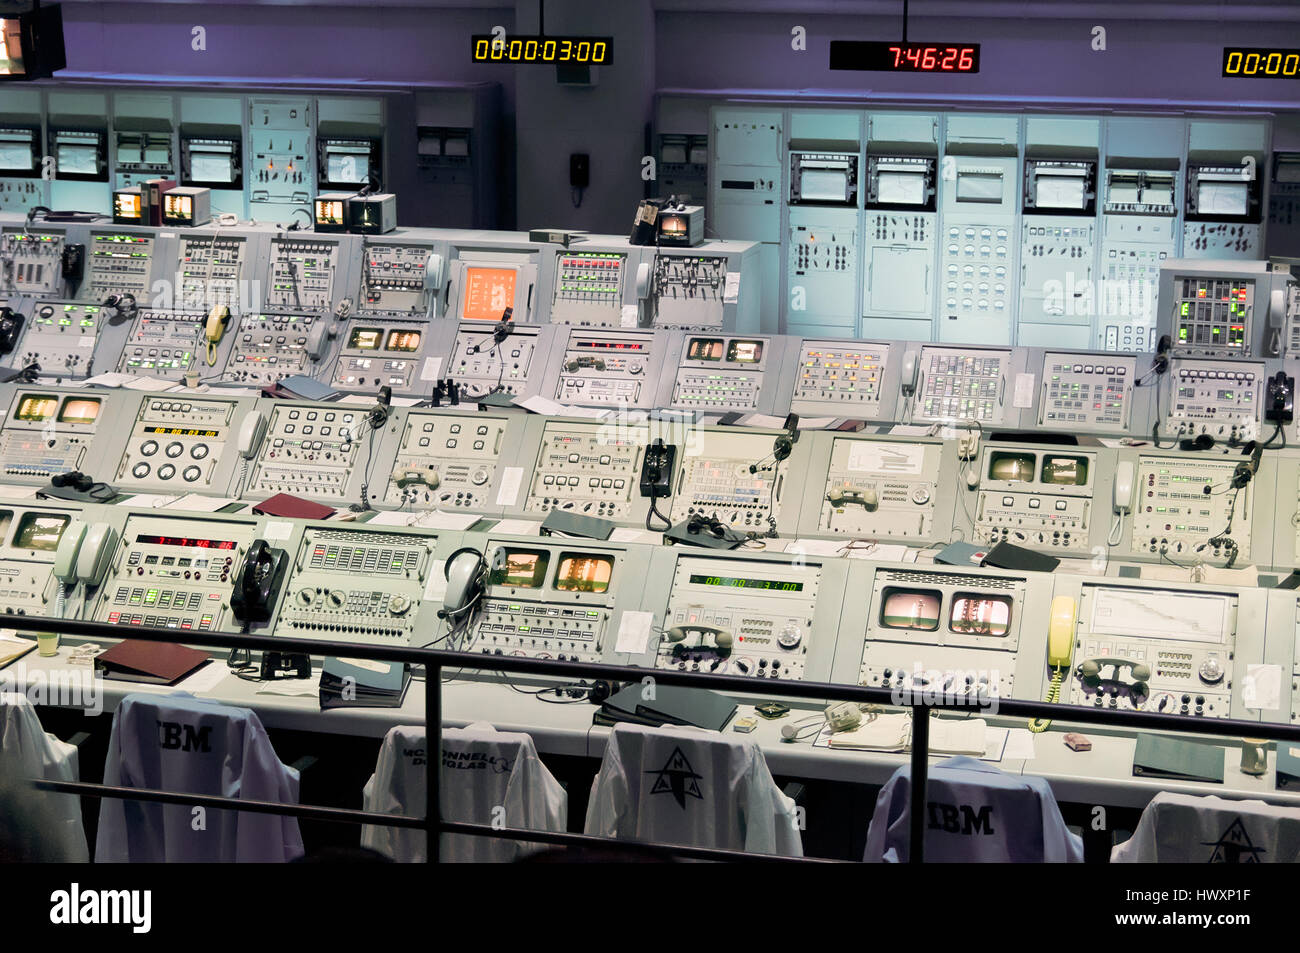 Cape Canaveral, USA - 22. November 2011: Innere Mission Control Center am Kennedy Space Center NASA letzten Jahrhunderts, Cape Canaveral. Stockfoto